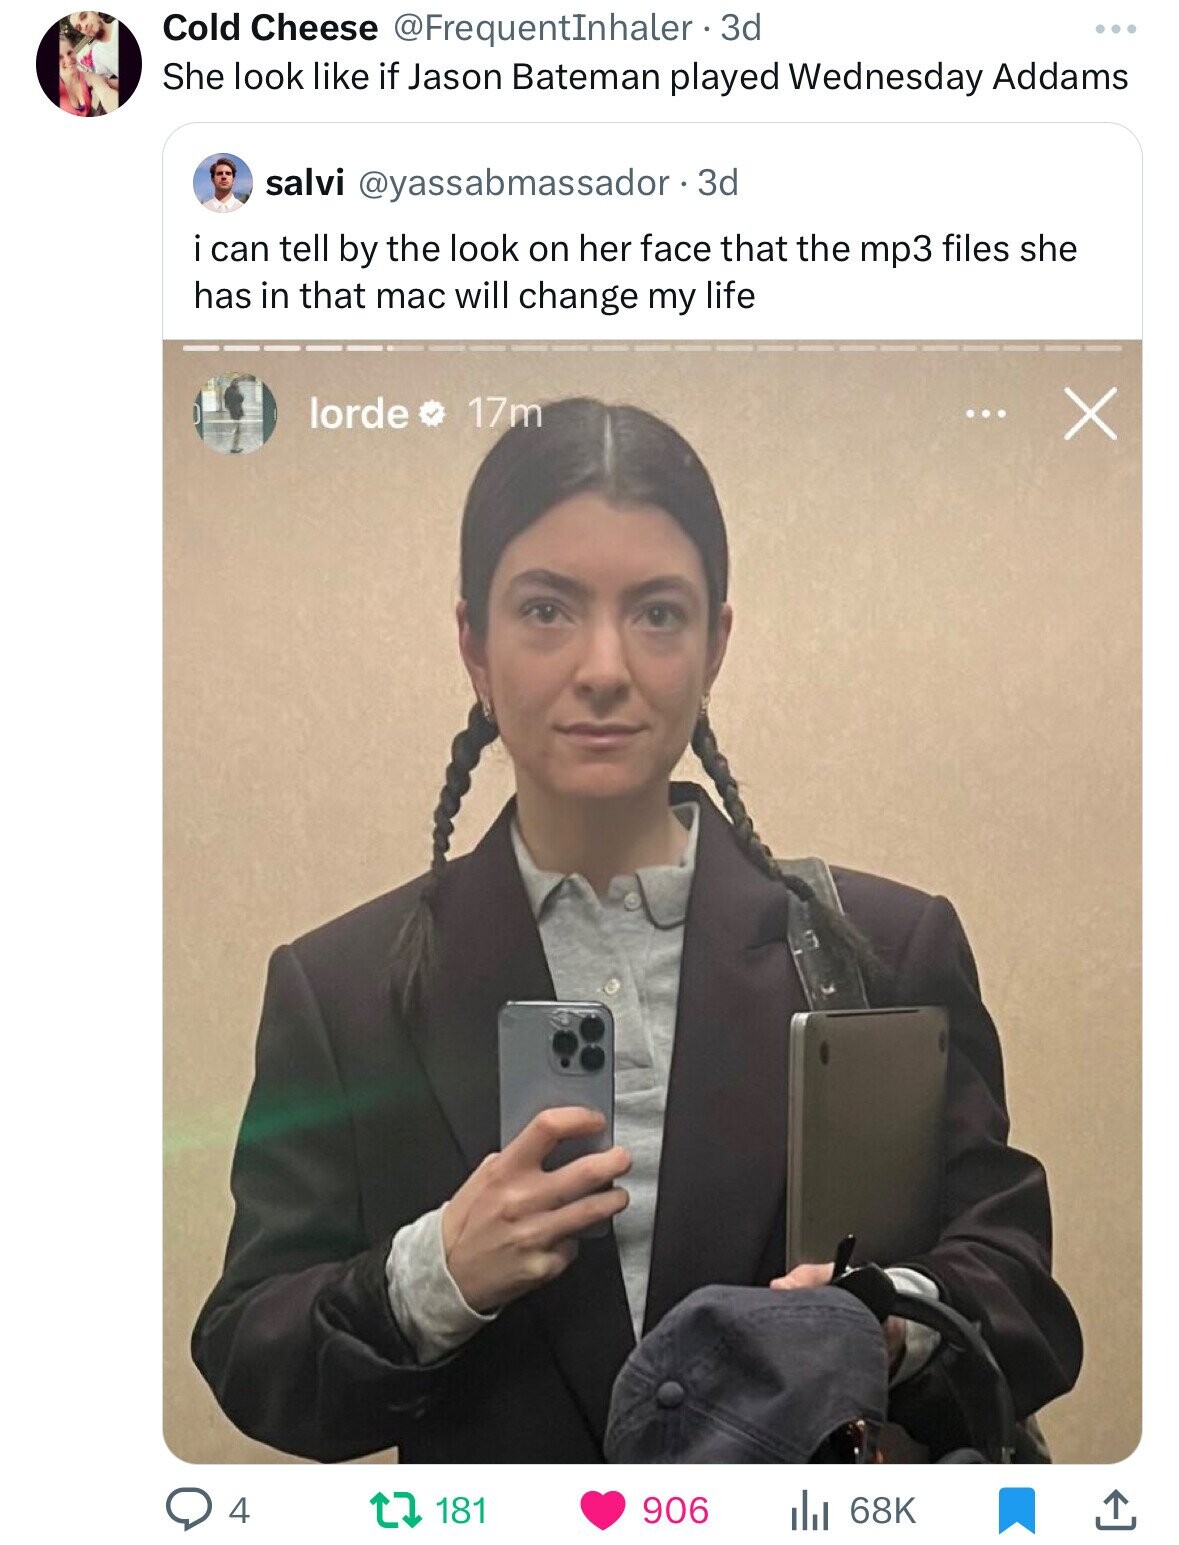 Cold Cheese @FrequentInhaler - 3d She look like if Jason Bateman played Wednesday Addams salvi @yassabmassador.3d i can tell by the look on her face that the mp3 files she has in that mac will change my life lorde 17m ... X 4 181 906 68K 